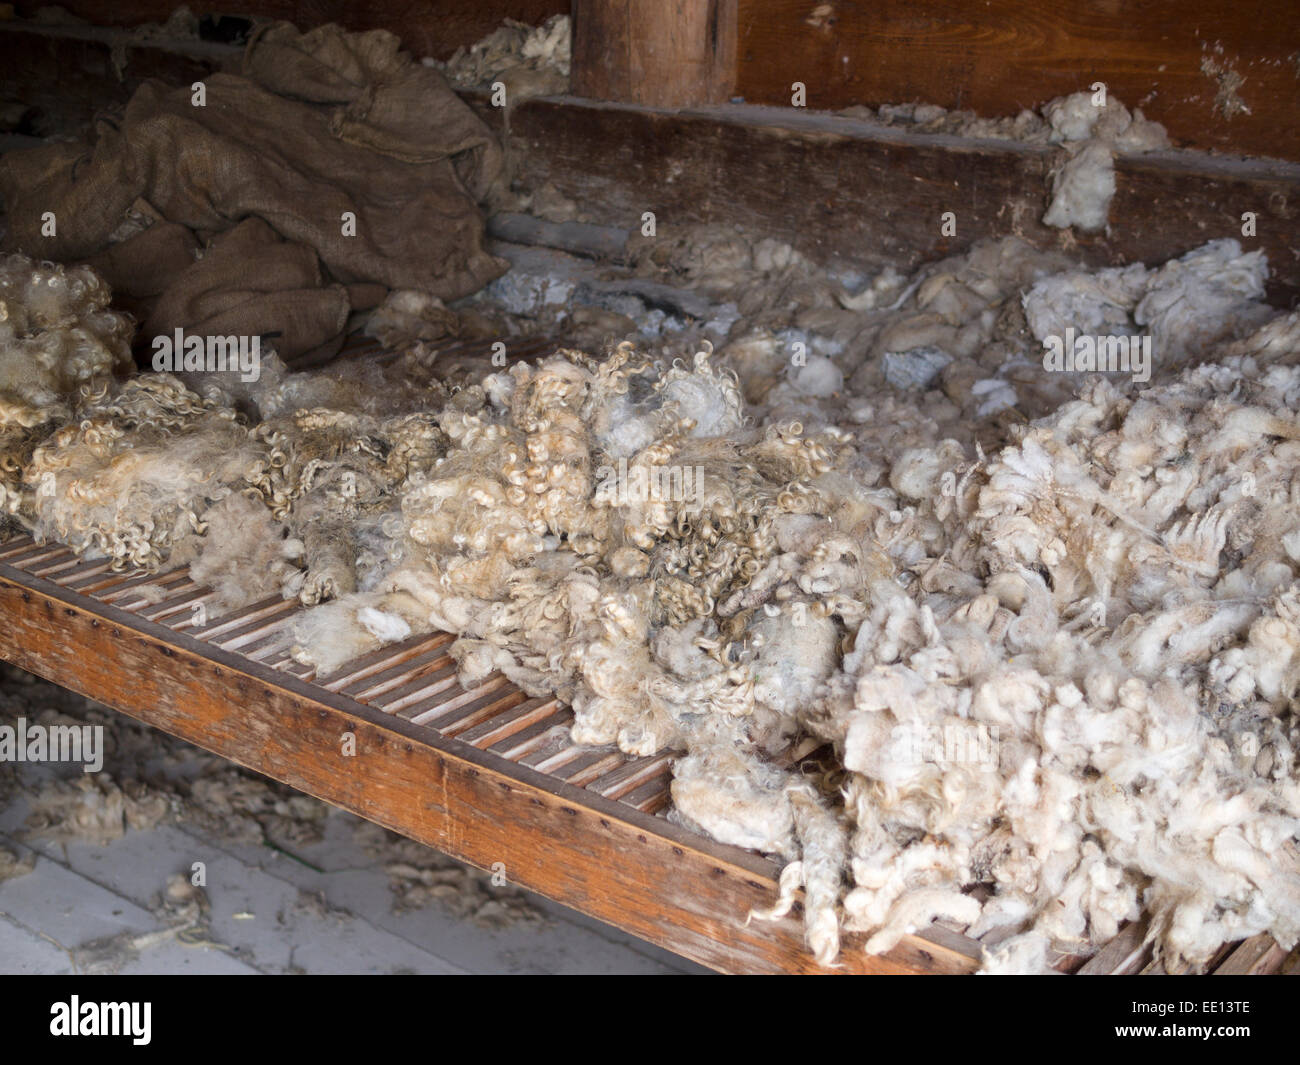 Freshly shorn sheep's wool. A pile of freshly cut sheep wool lies on a vented table awaiting cleaning and processing. Stock Photo